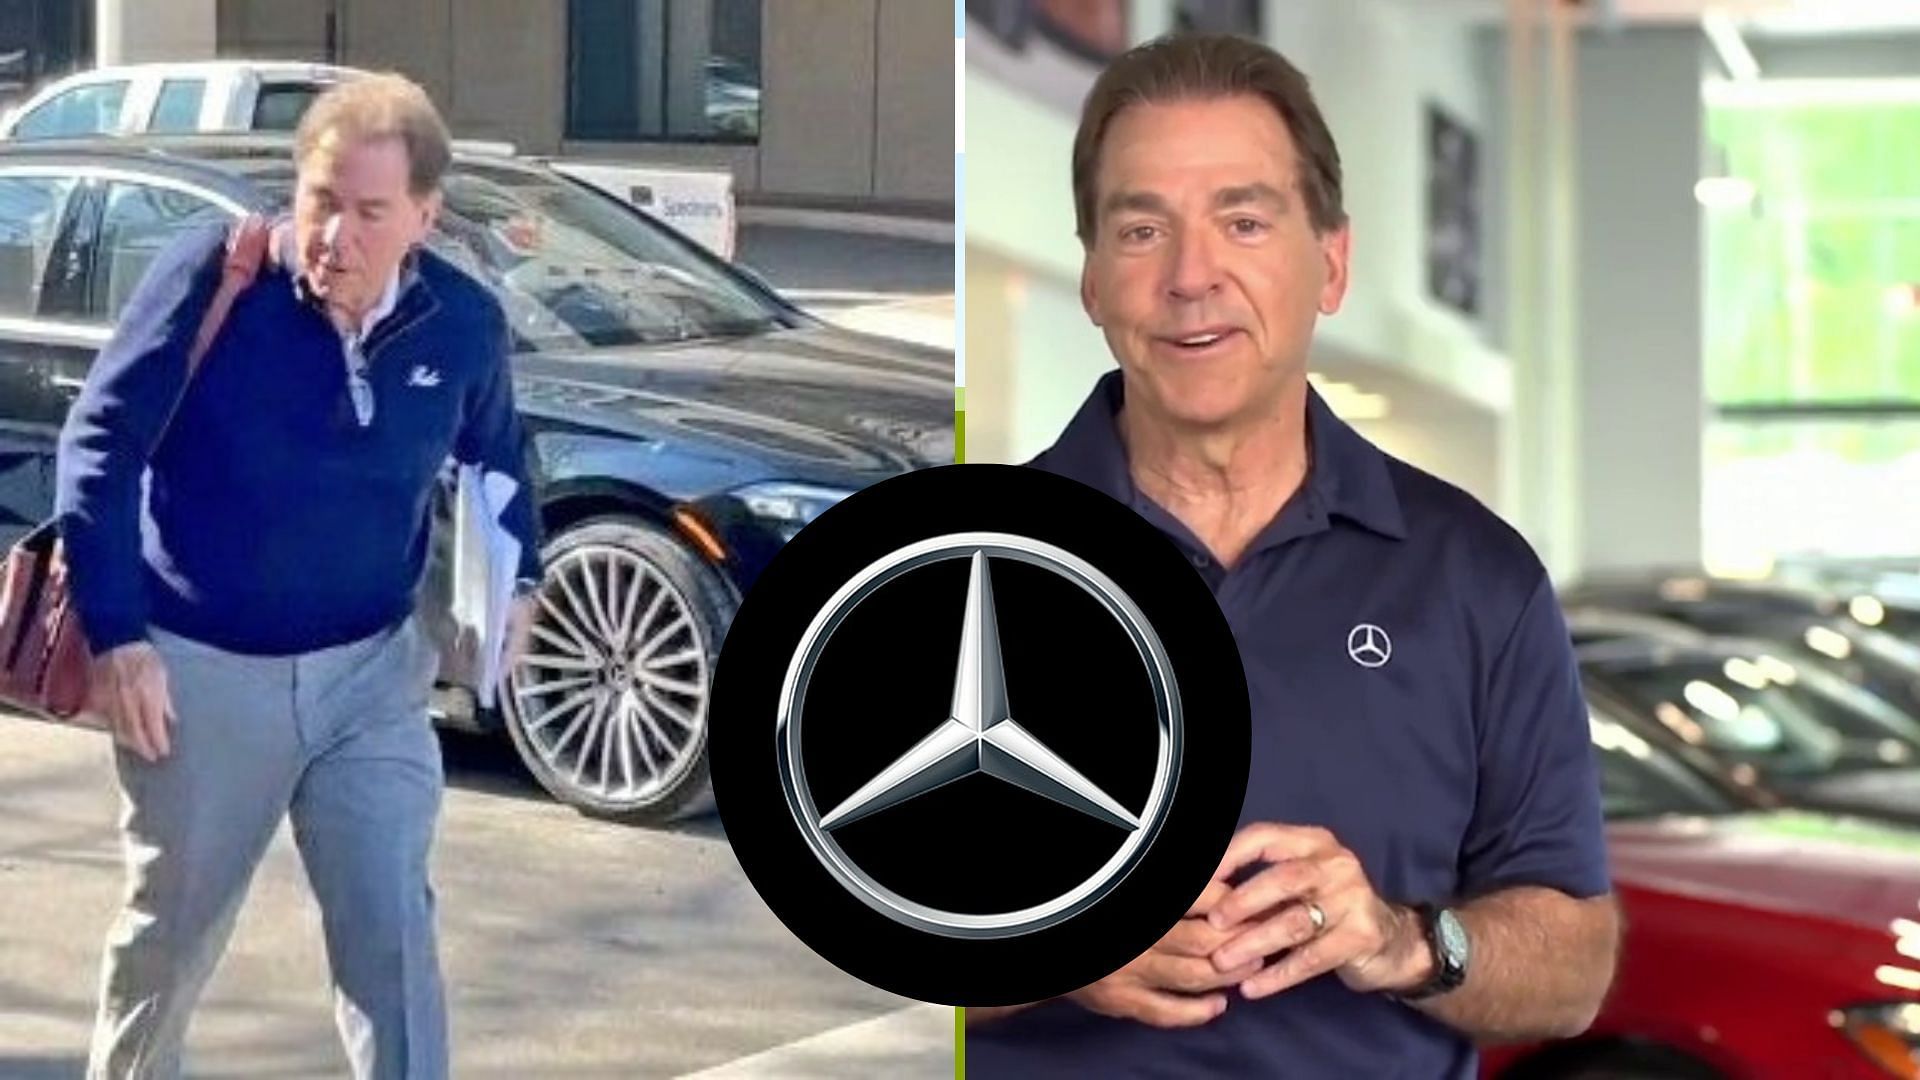 Nick Saban buys 2 Mercedes-Benz stores for a whopping $700 million dream deal in collaboration with Dream Motor group